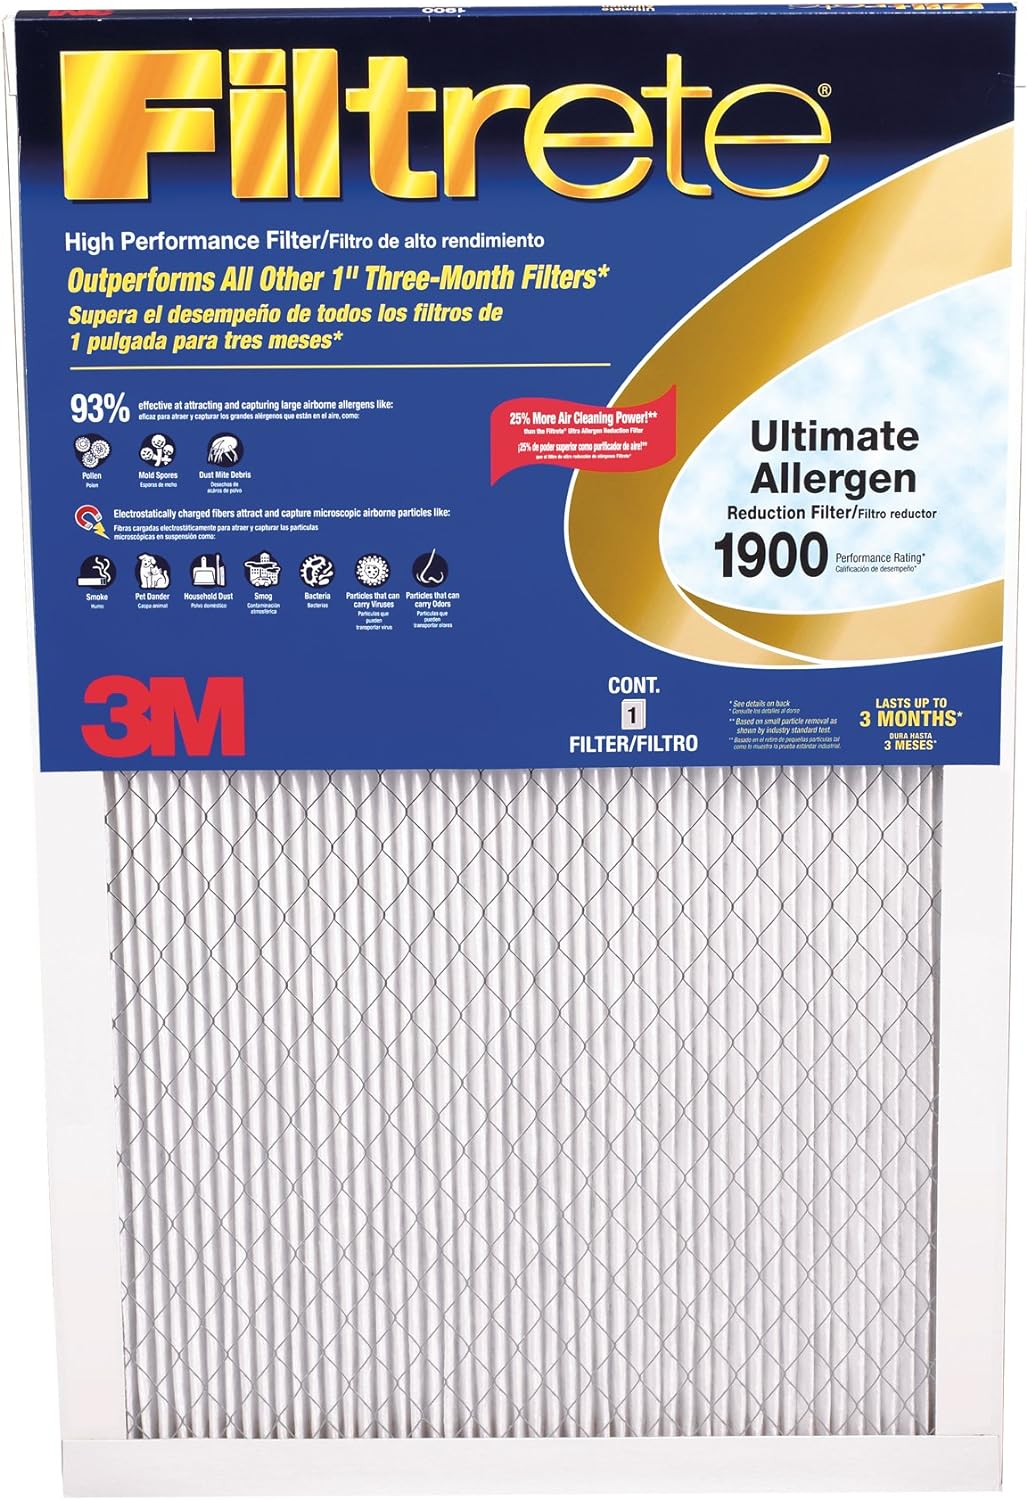 3M Filtrete 1900 Ultimate Allergen Reduction Pleated Filter - 10x20x1in